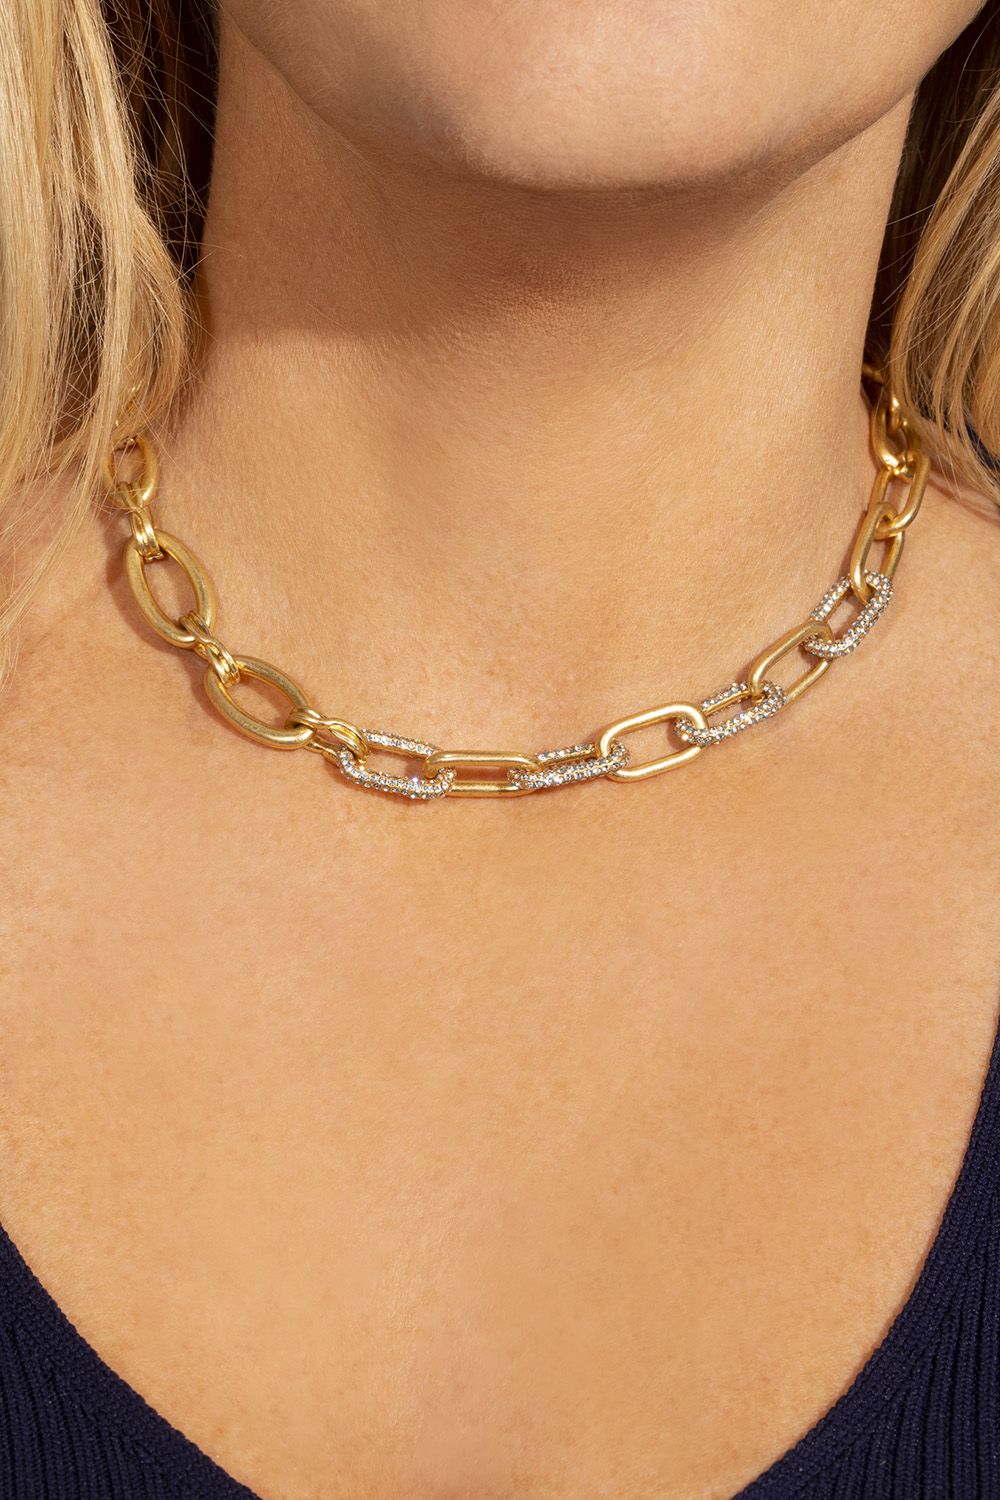 Simple and stunning, this gold chunky necklace features subtle sparkle with pave encrusted links on one half. Strong but delicate, it's such an on trend look right now and perfect for the winter months when we need our jewellery to really shine through. The 16 inch gold plated chain features a lobster clasp and 3 inch extender so you can adjust it for your look. It also comes with the most perfect matching bracelet! When it doubt, go simple and style it out.